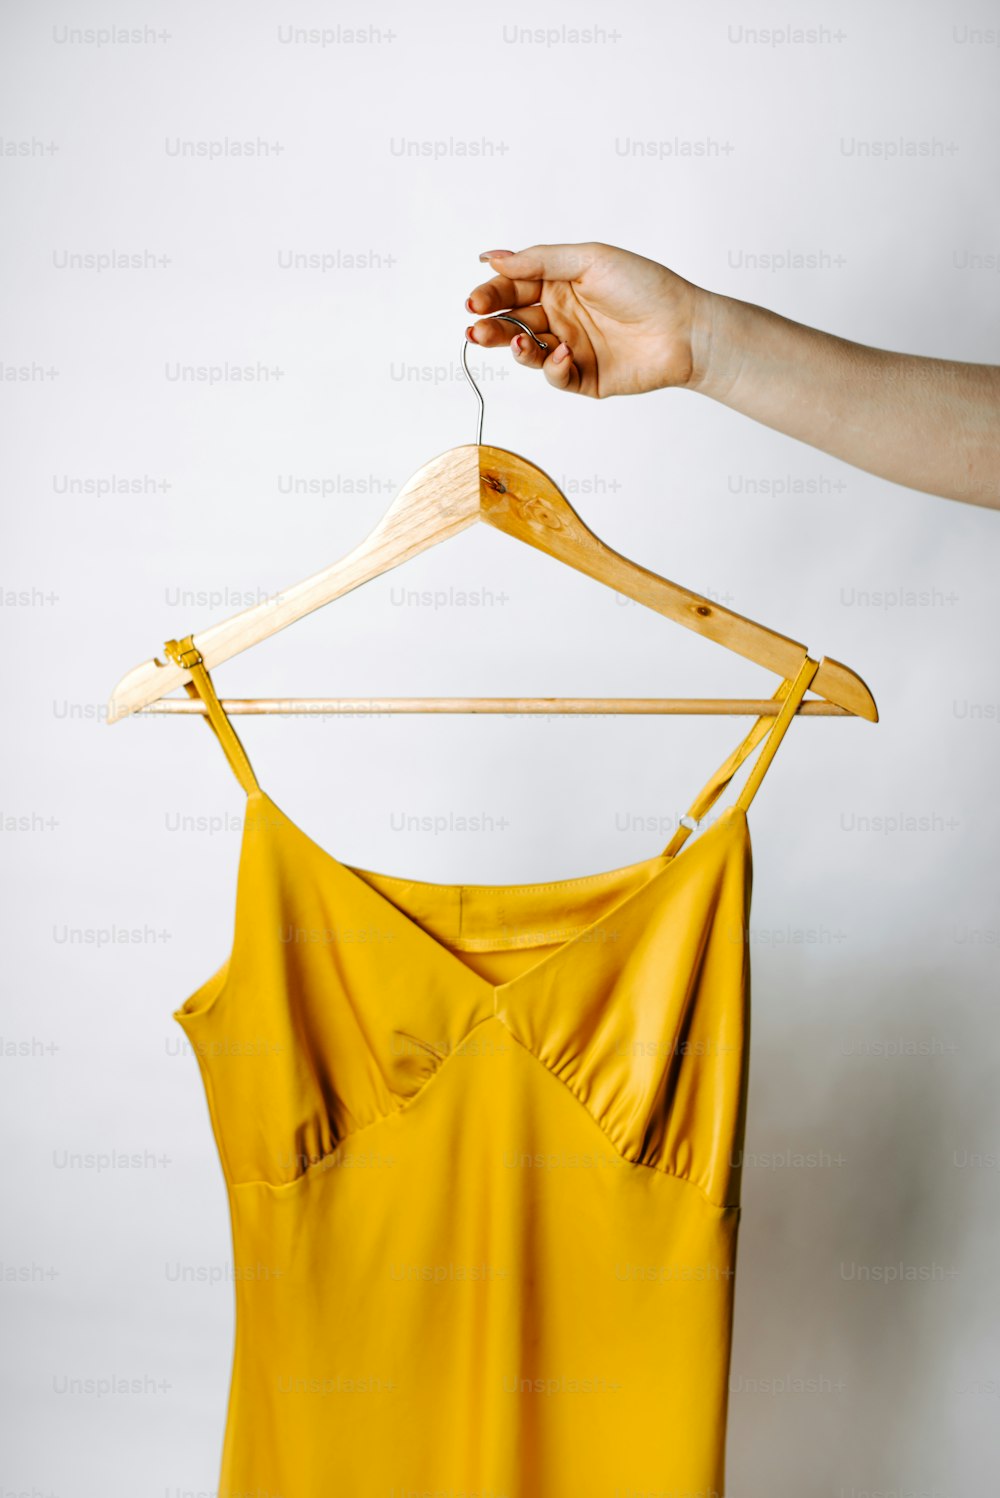 a woman's hand holding a yellow top on a hanger